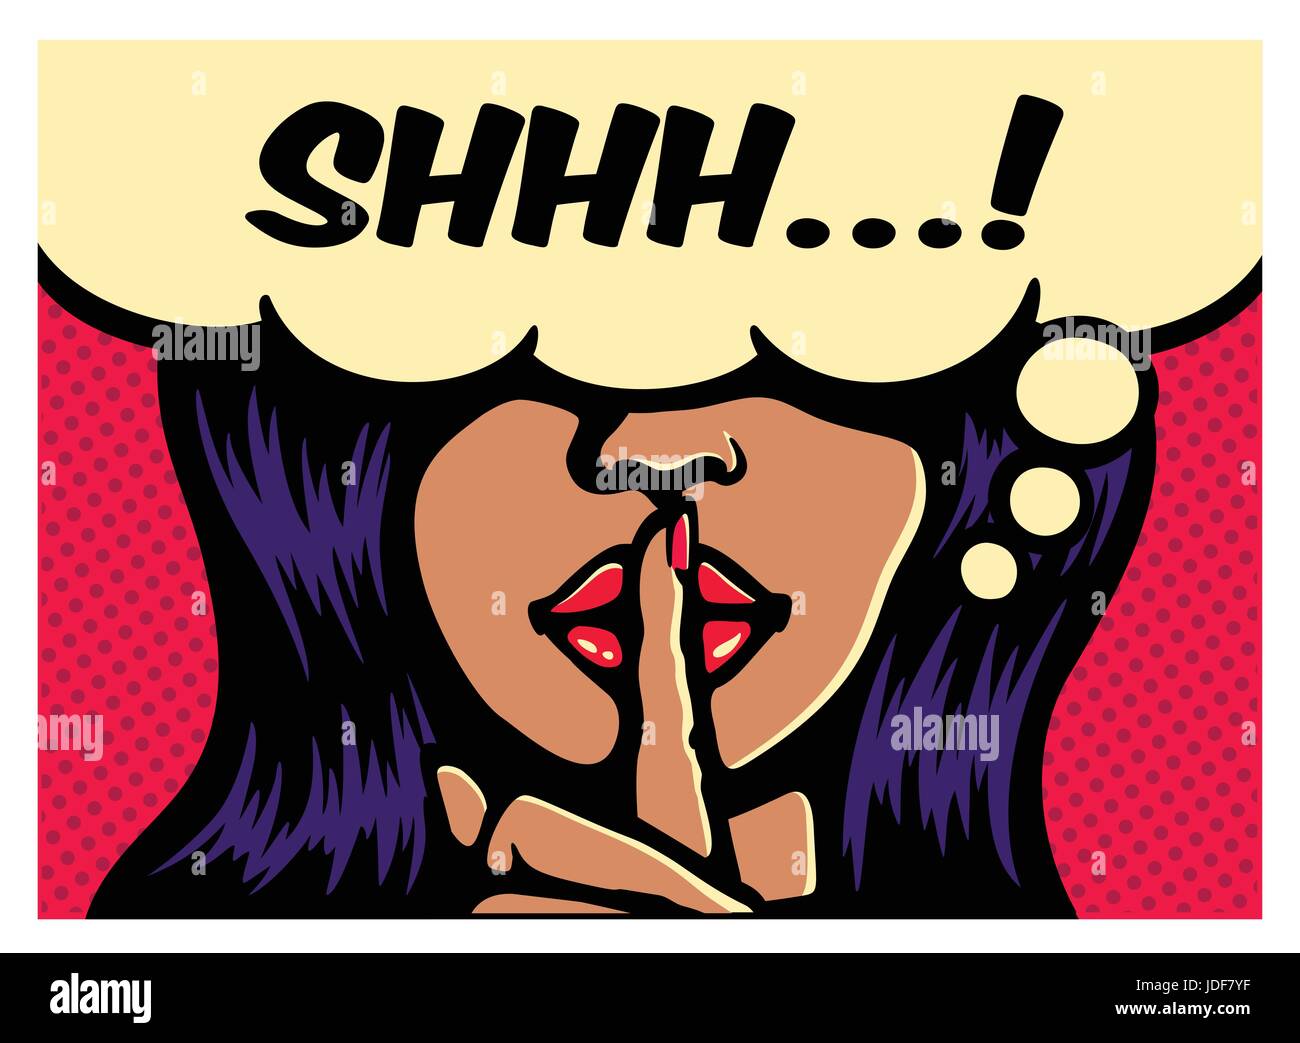 Shhh! Less talk, more action, glamorous woman making silence gesture with finger on lips comic book pop art style vector poster illustration Stock Vector